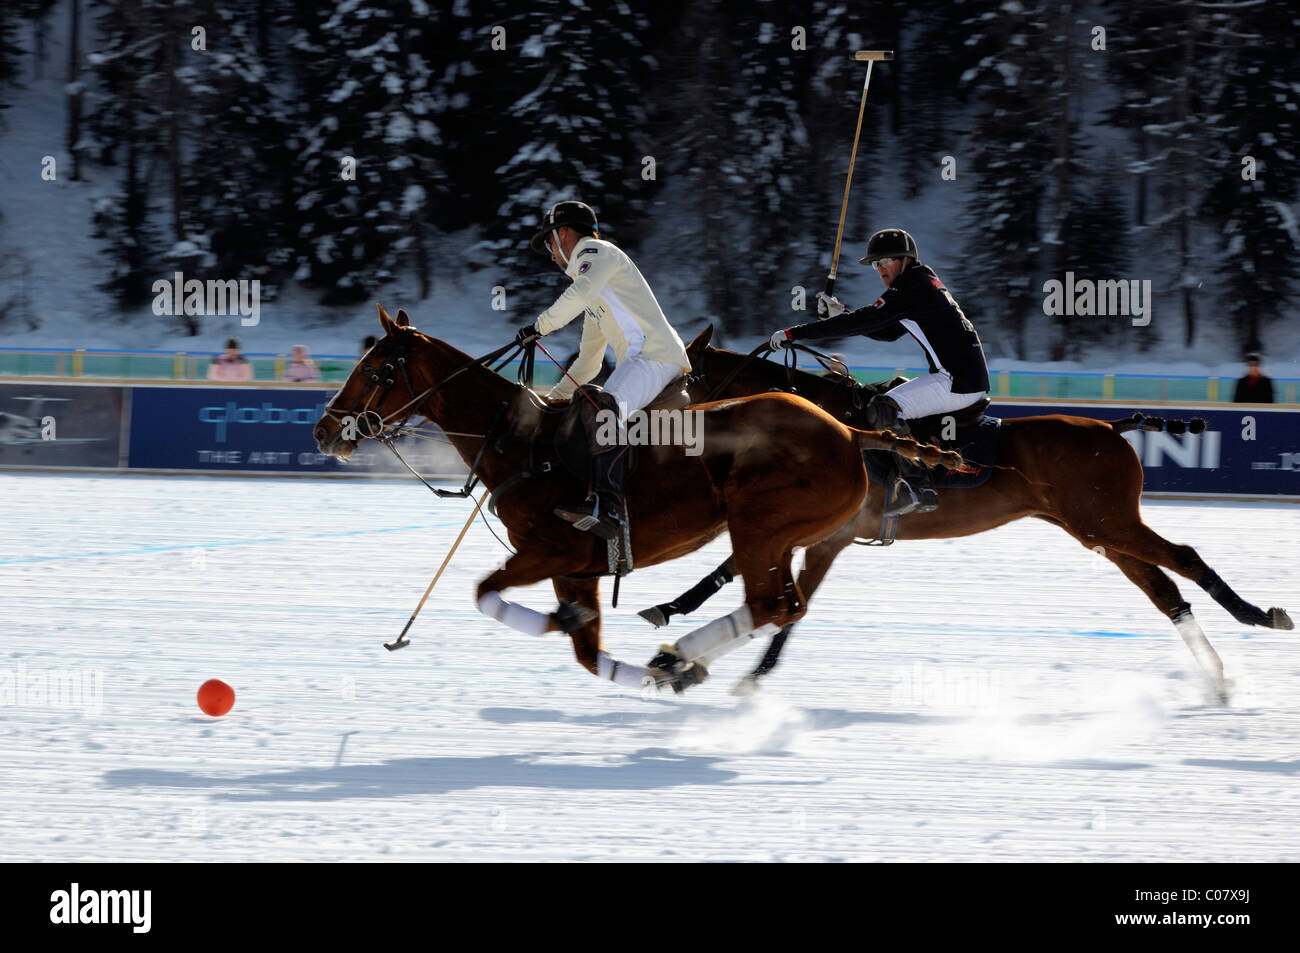 Polo players chasing the ball, Team Maserati against Team Brioni, 26. St. Moritz Polo World Cup on Snow, St. Moritz Stock Photo